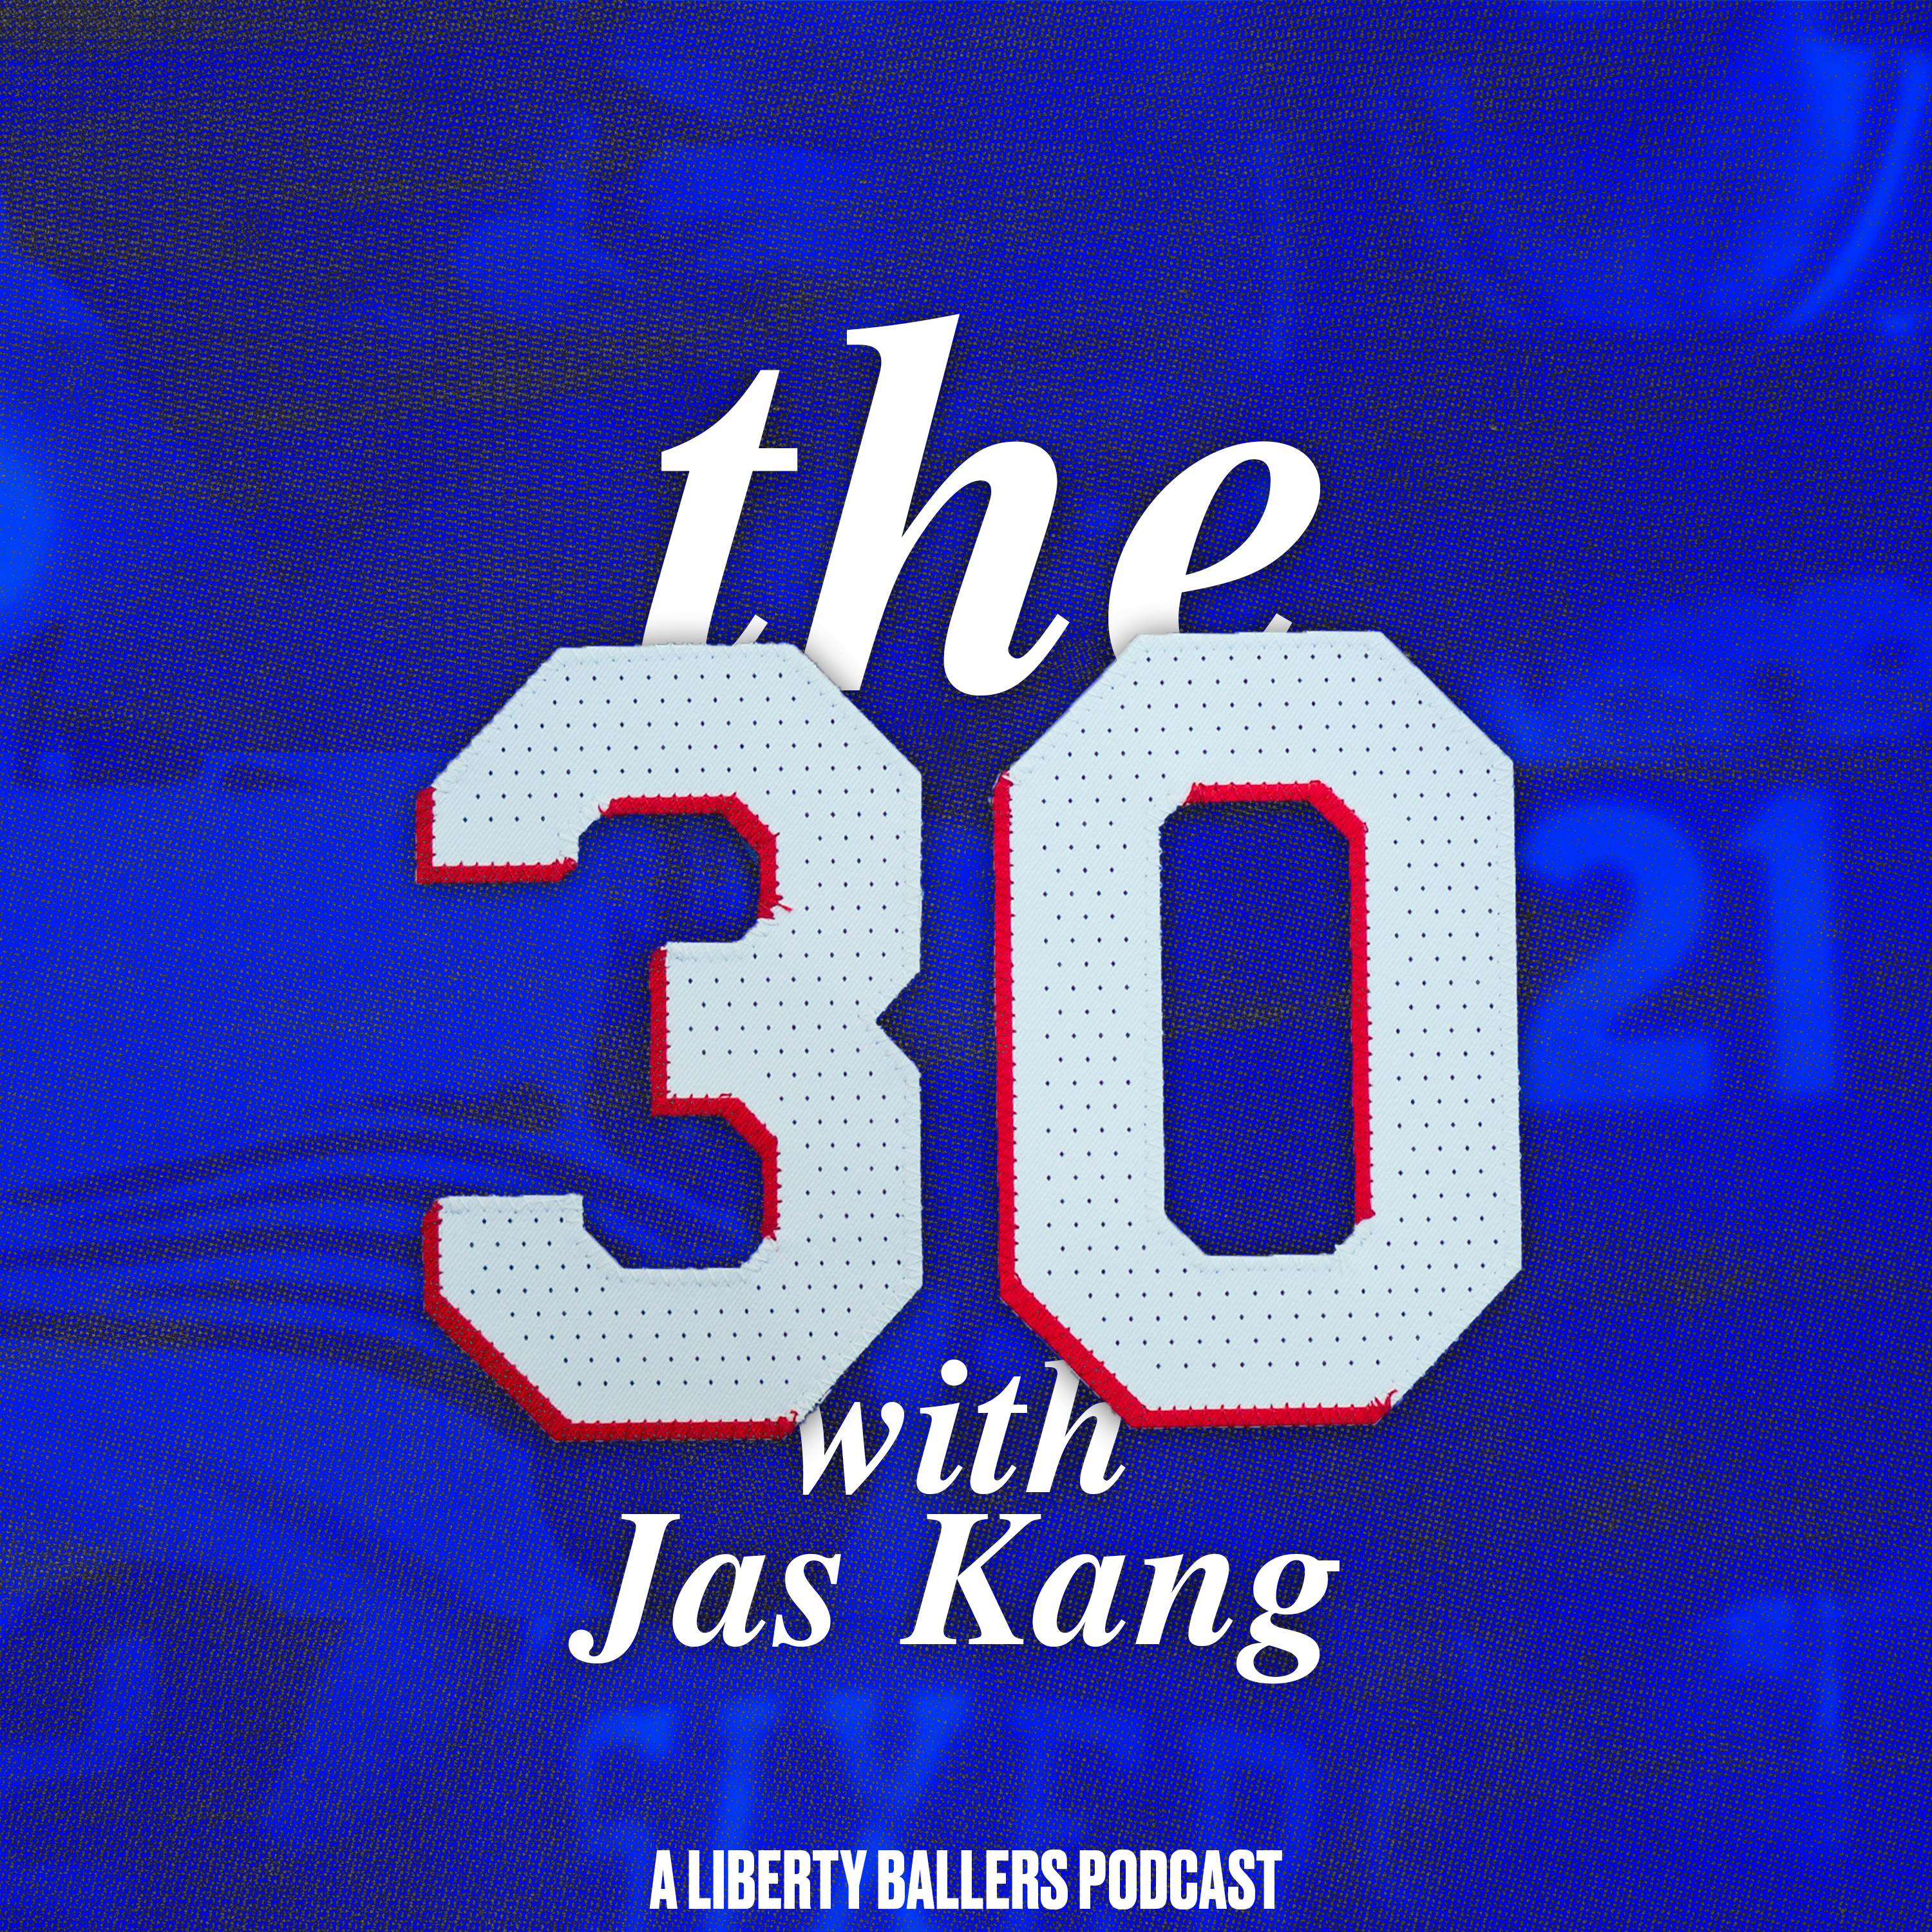 James Harden’s minutes, Joel Embiid’s dominance, plus too much scoring in the NBA? The 30: With Jackson Frank.